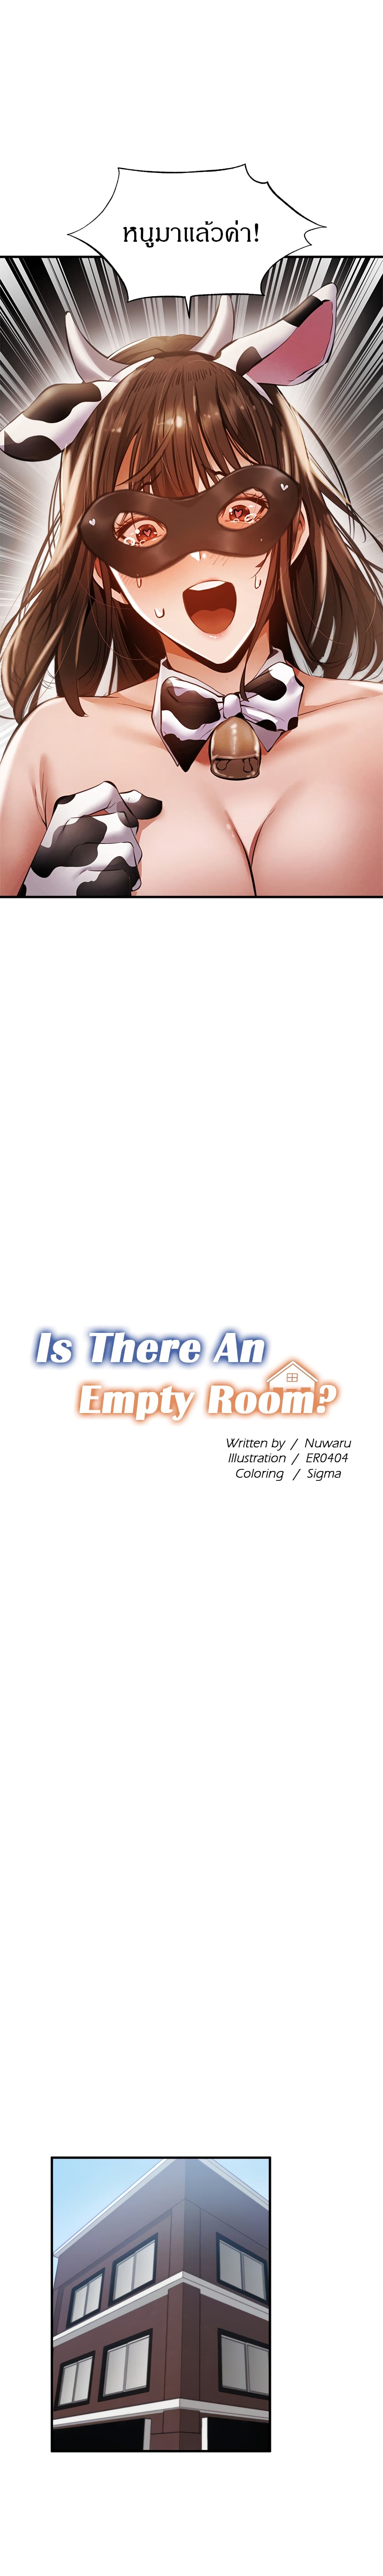 Is There an Empty Room